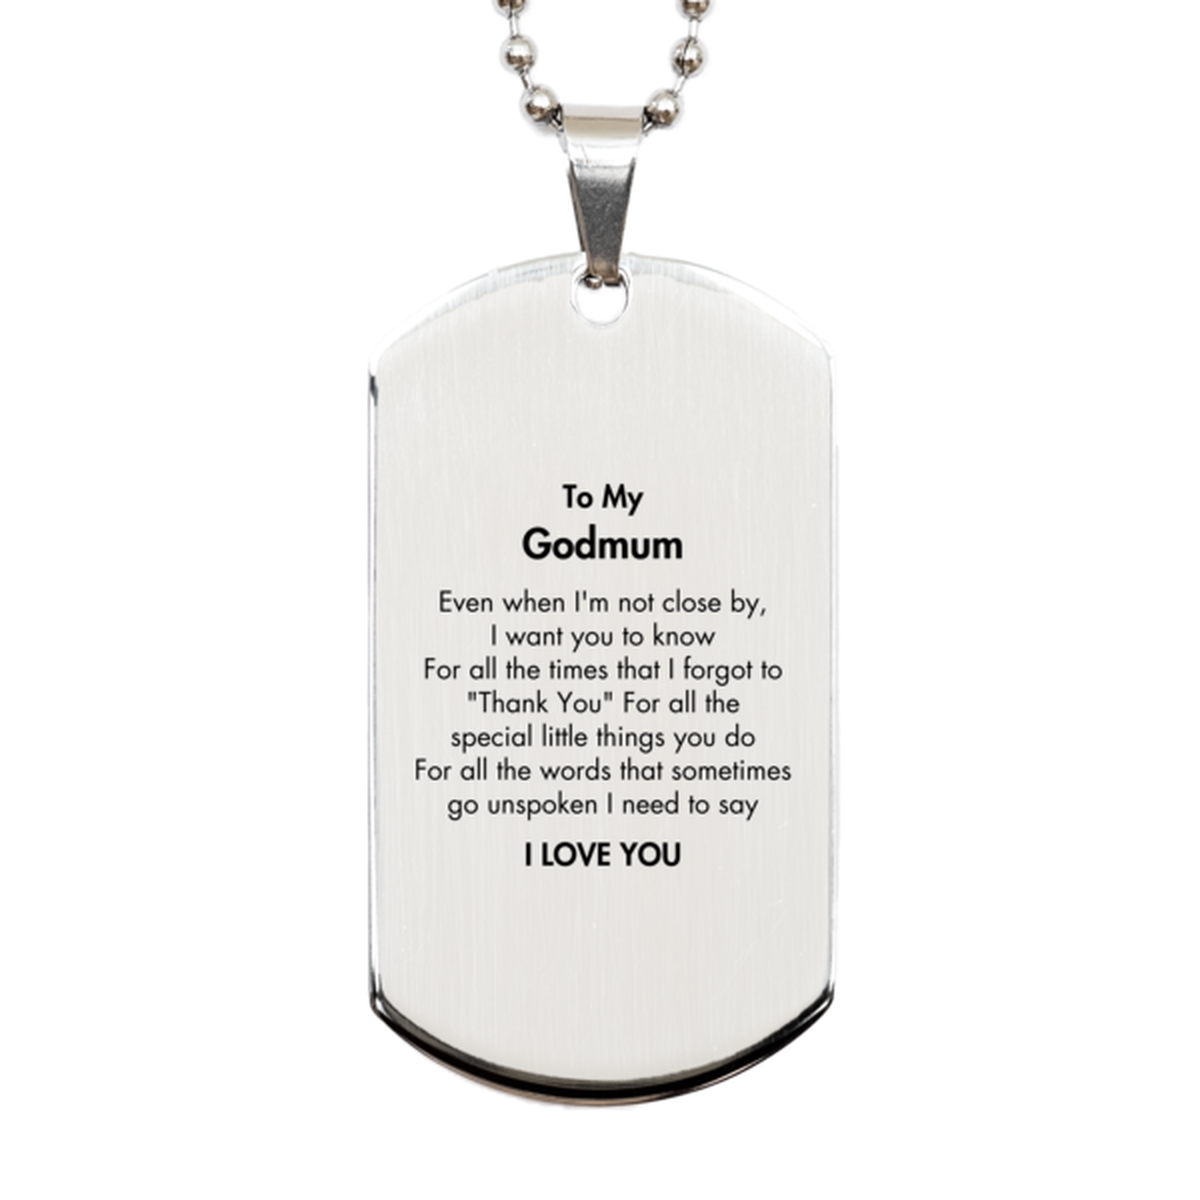 Thank You Gifts for Godmum, Keepsake Silver Dog Tag Gifts for Godmum Birthday Mother's day Father's Day Godmum For all the words That sometimes go unspoken I need to say I LOVE YOU